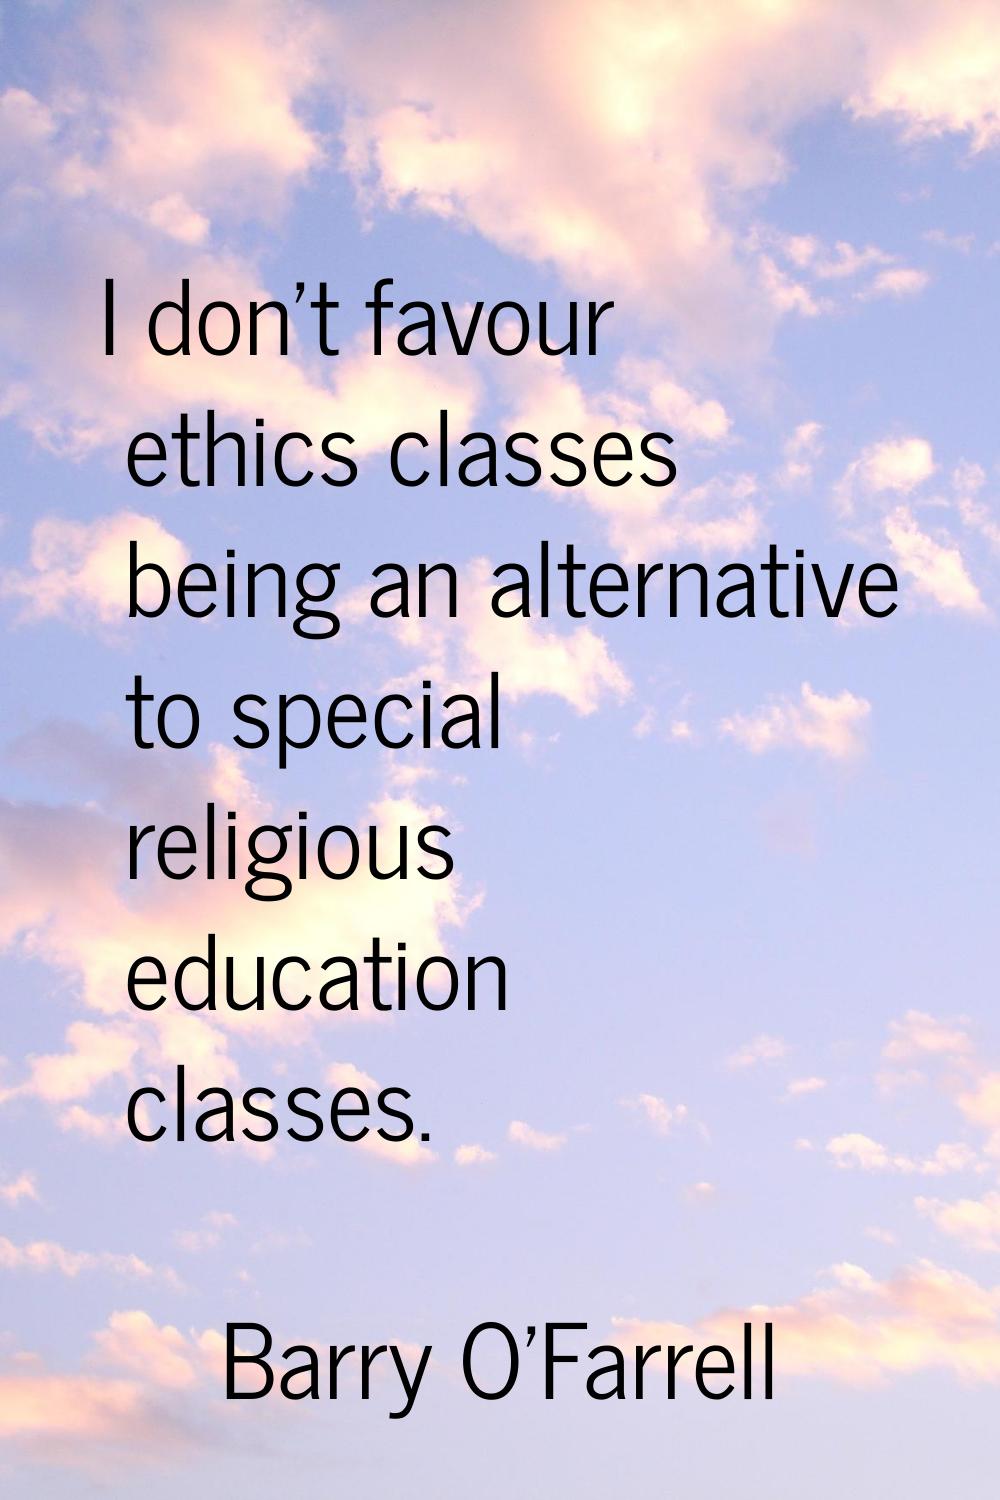 I don't favour ethics classes being an alternative to special religious education classes.